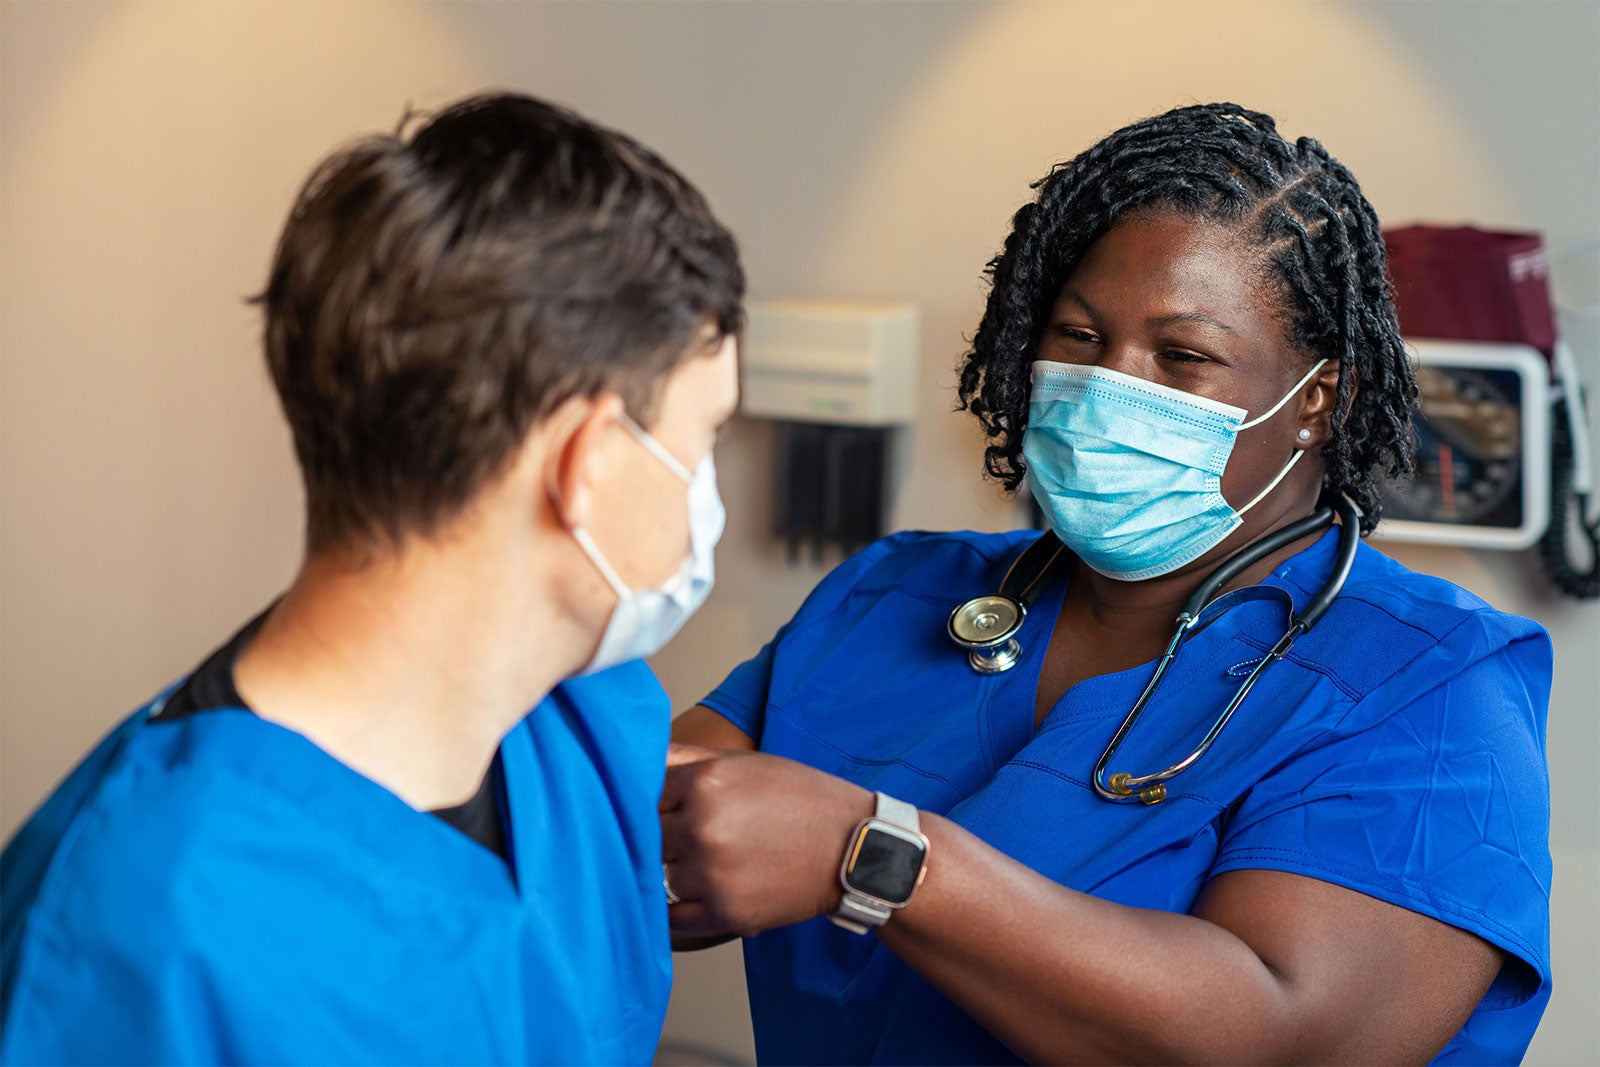 A Black female healthcare worker puts a band-aid on a young white man's arm. Both are wearing blue surgical facemasks.